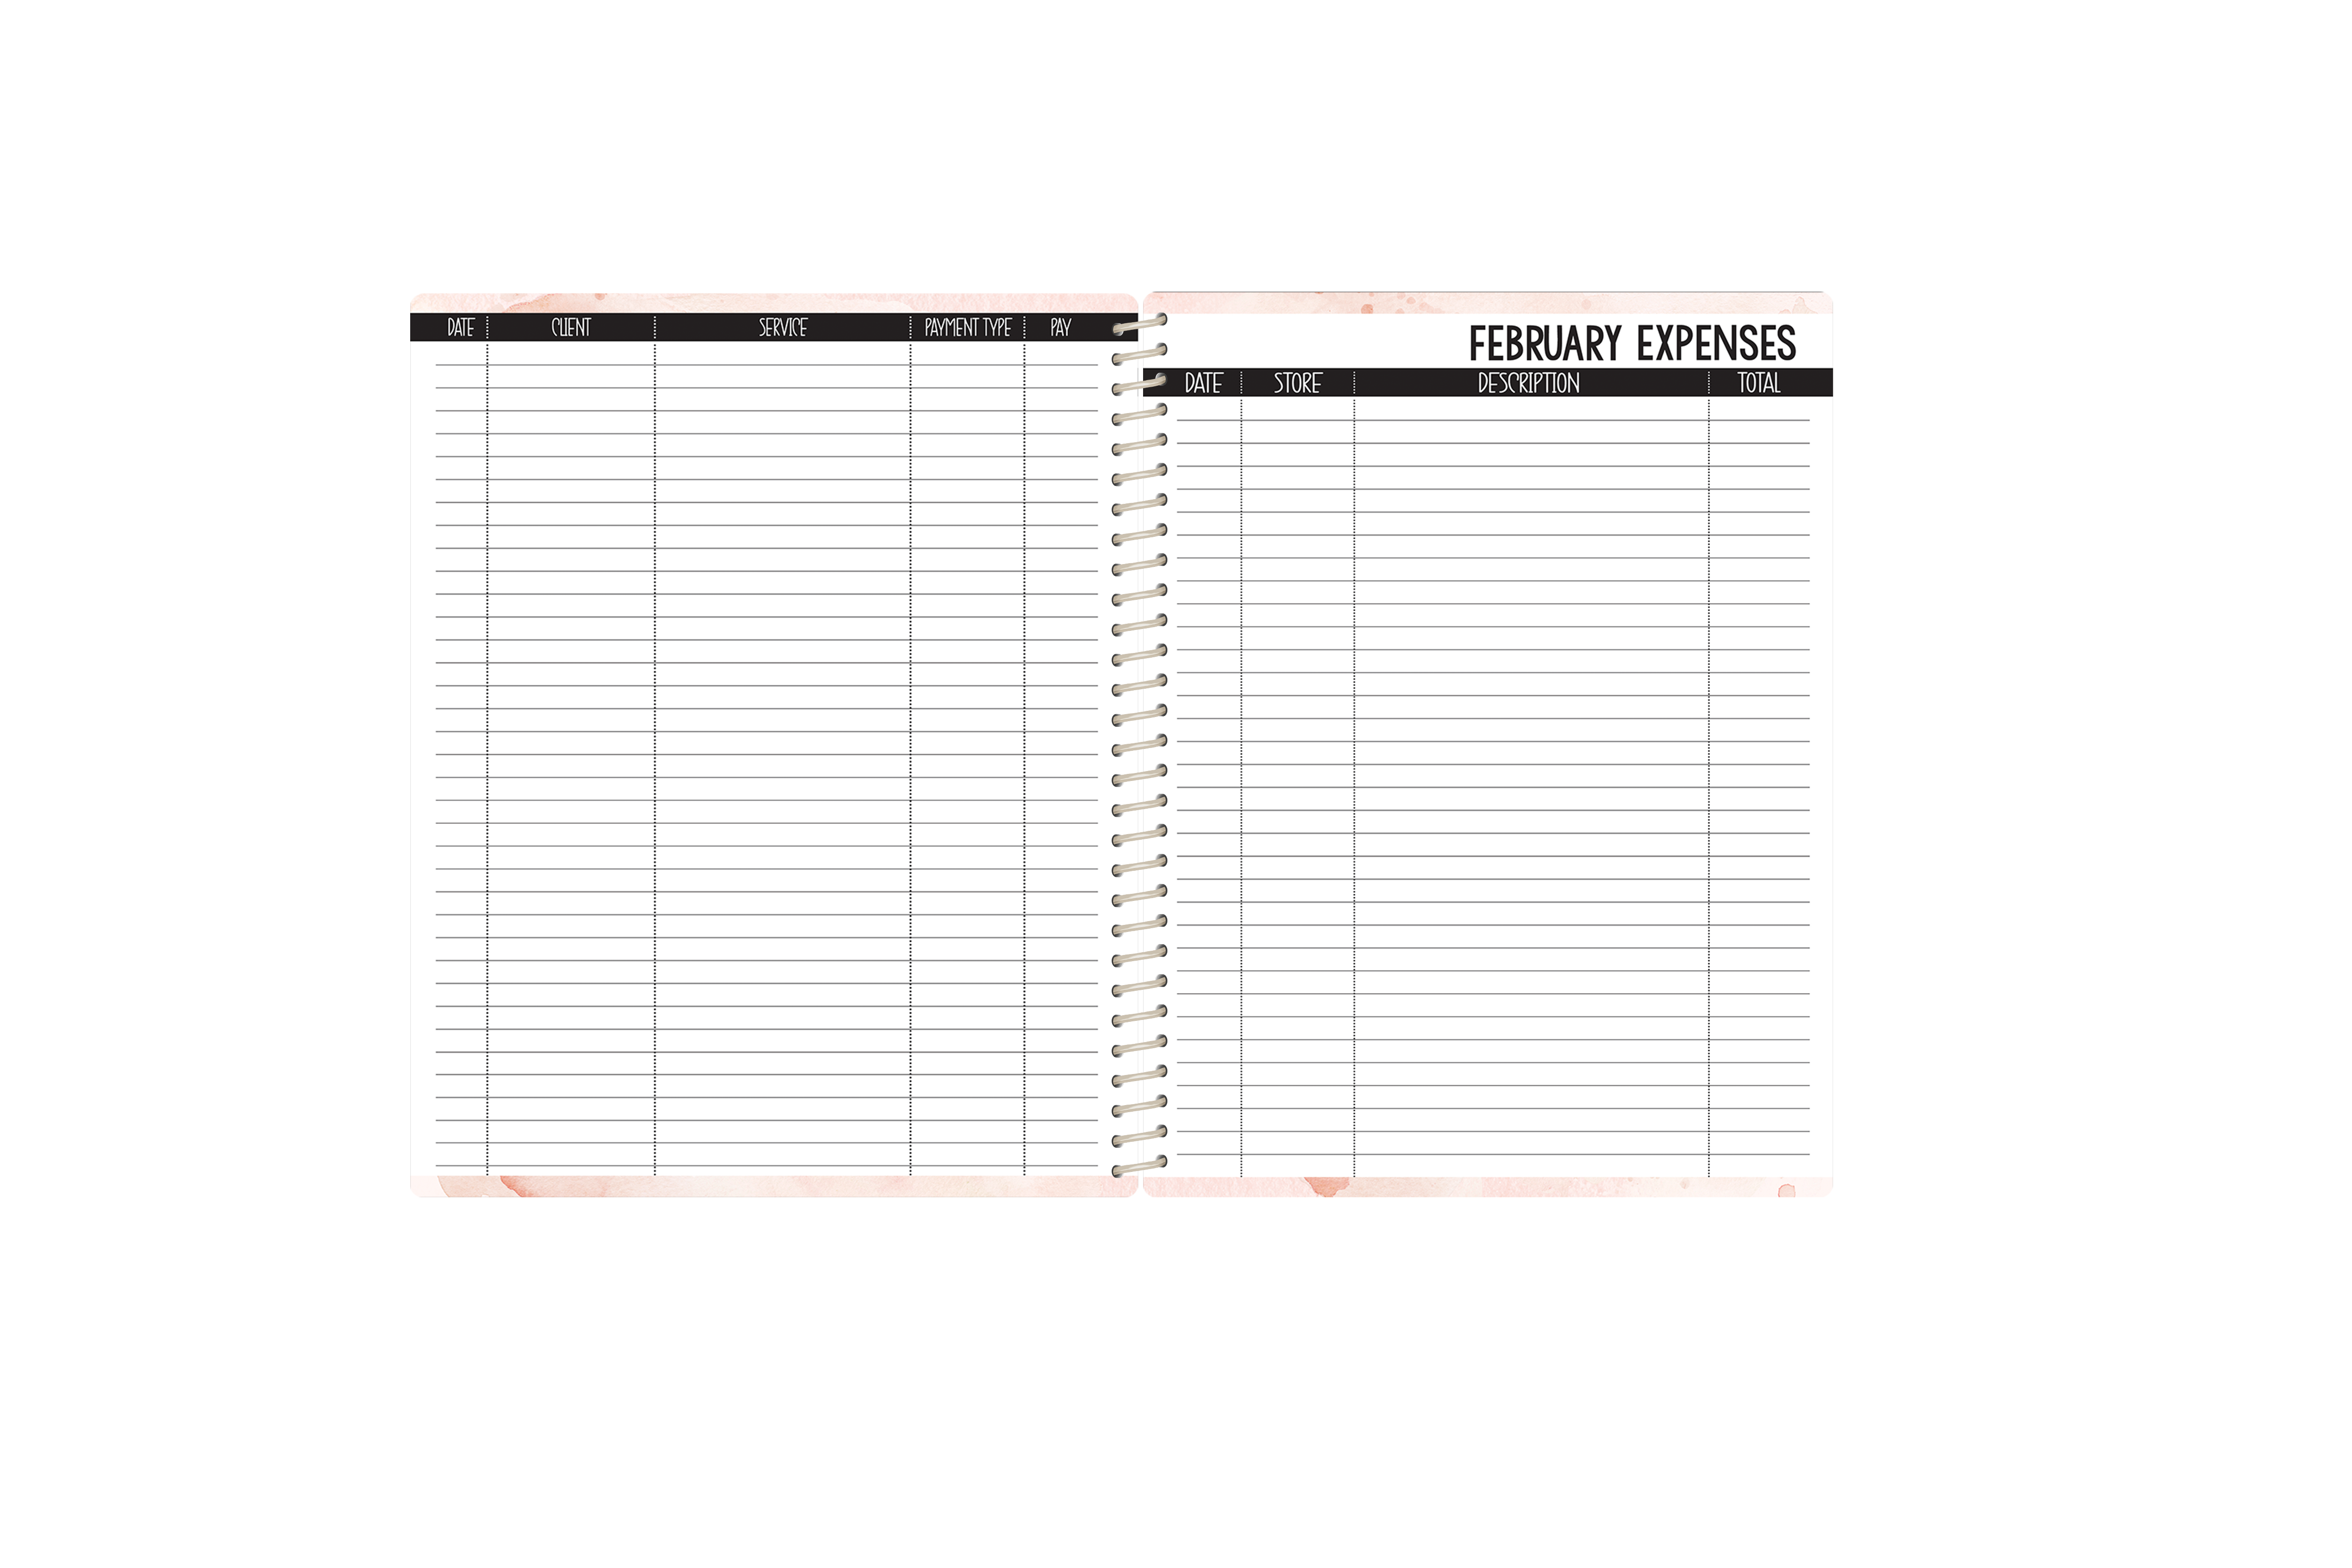 Small Biz Sales Planner - BLACK LINED HEARTS